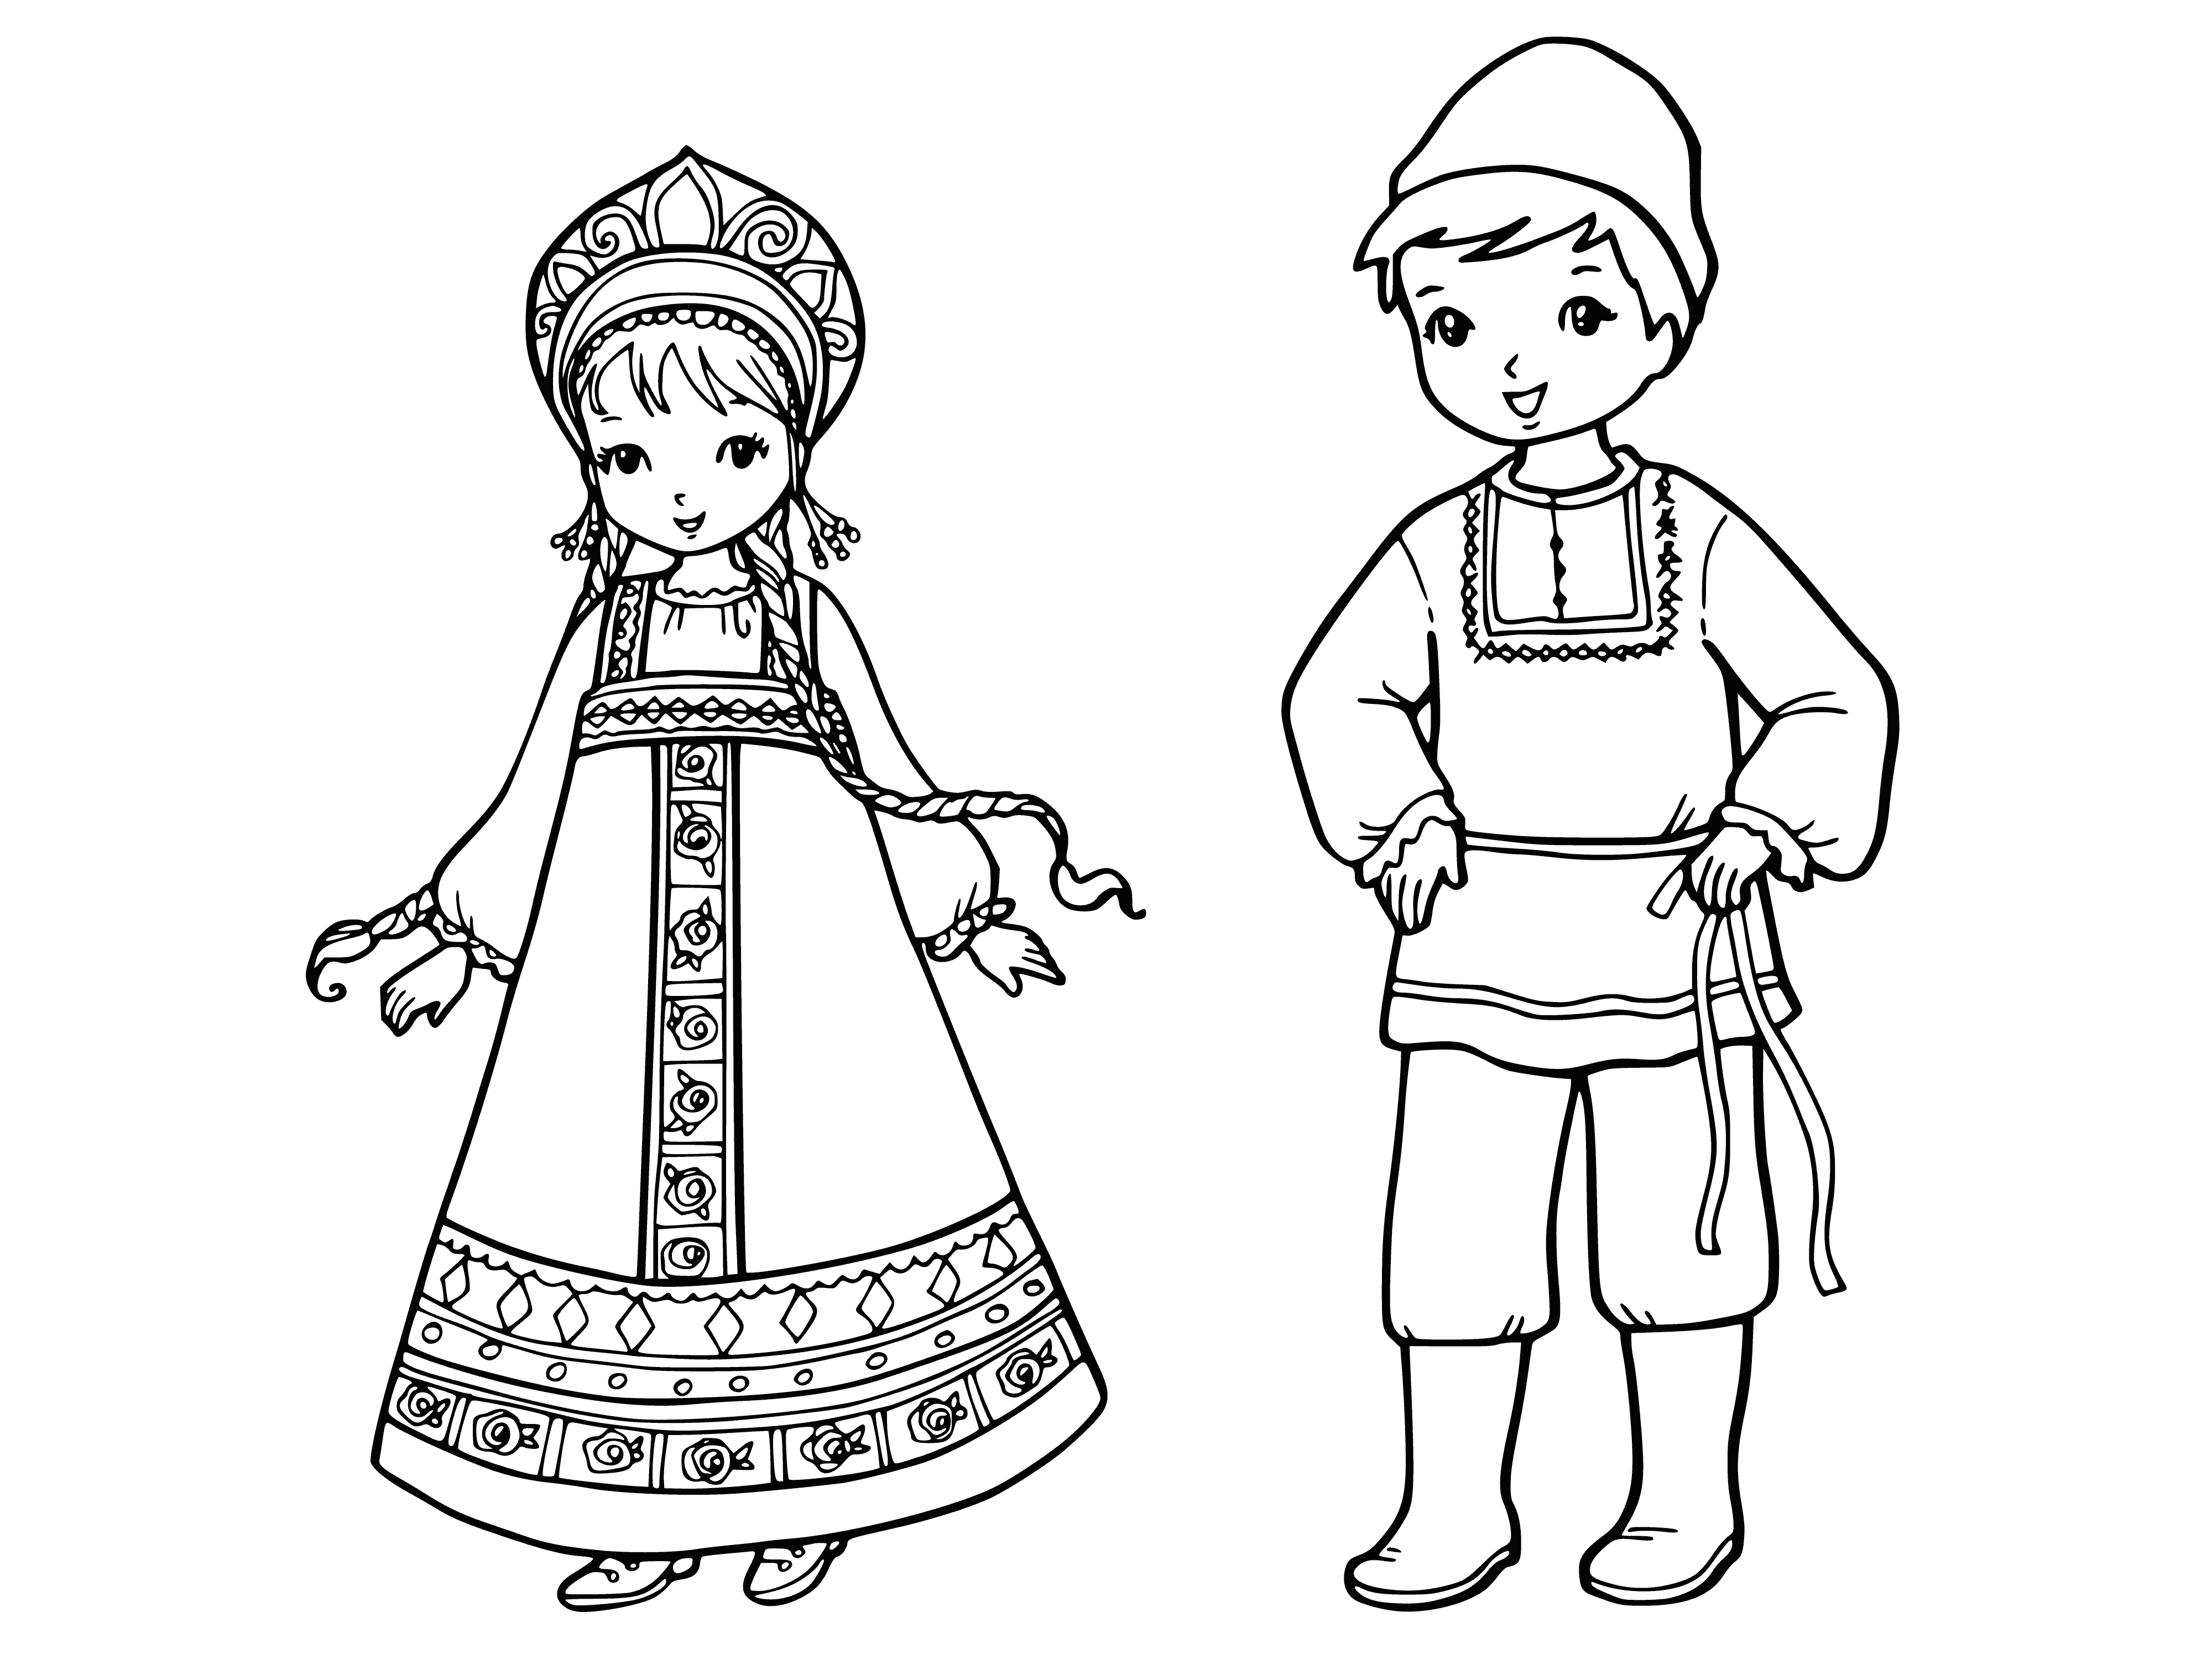 Russian children coloring page